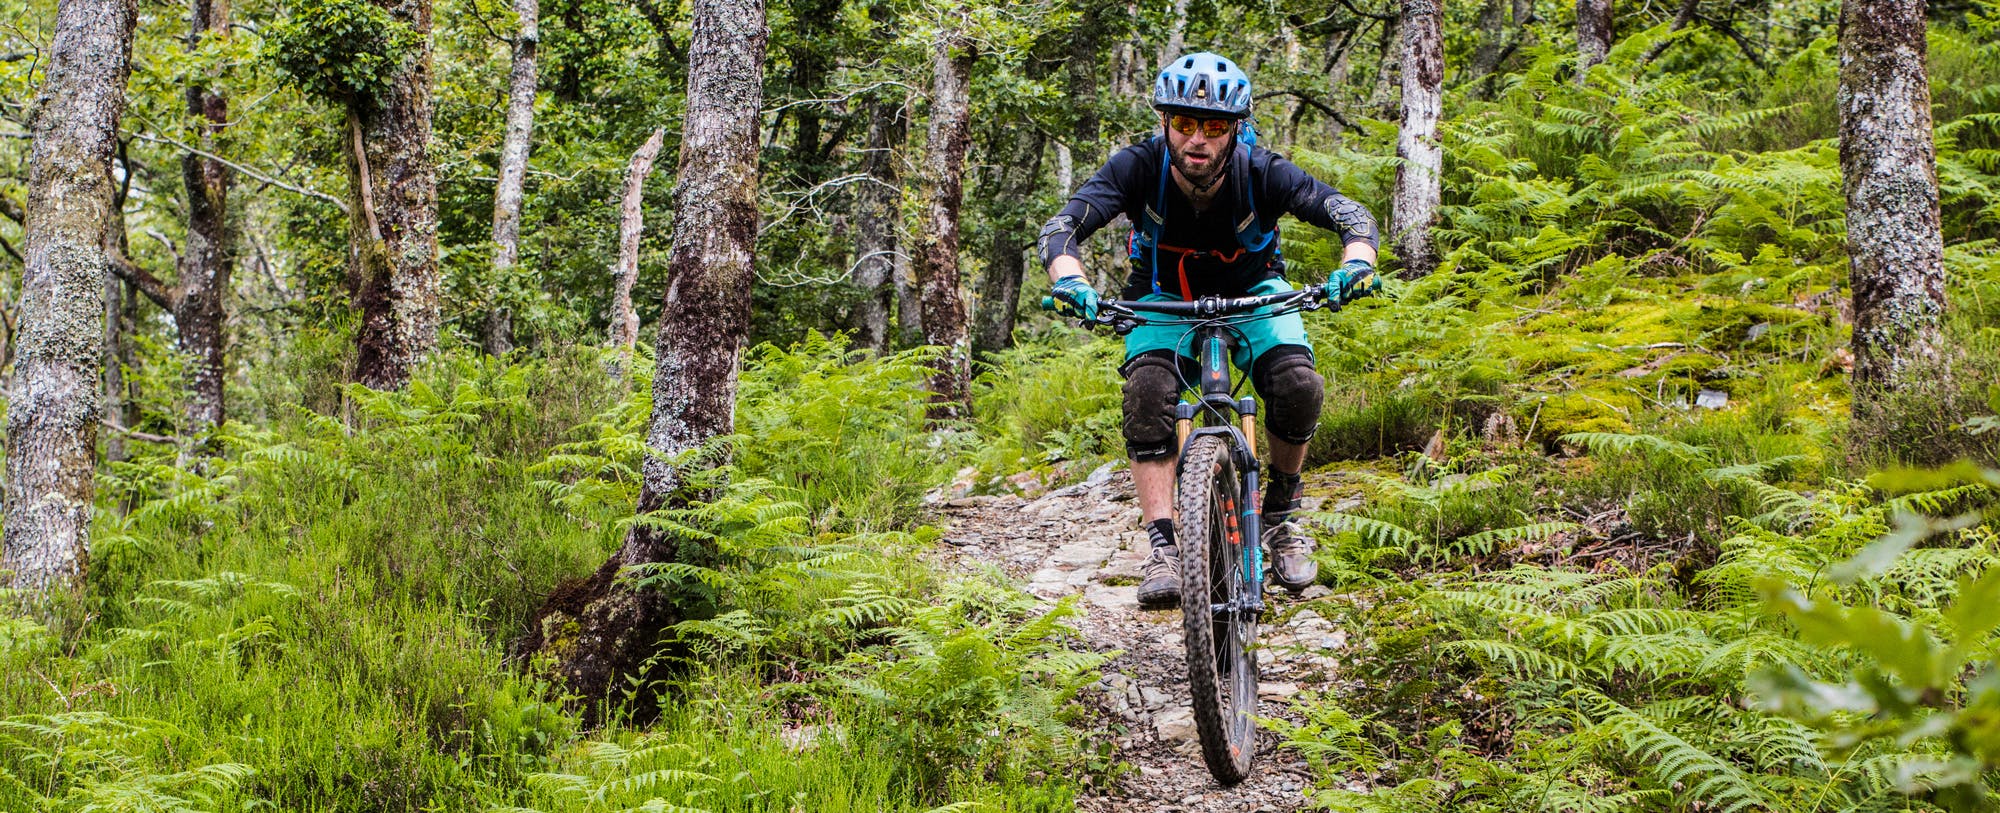 Beyond the Helmet: 3 Pieces of Mountain Bike Safety Gear